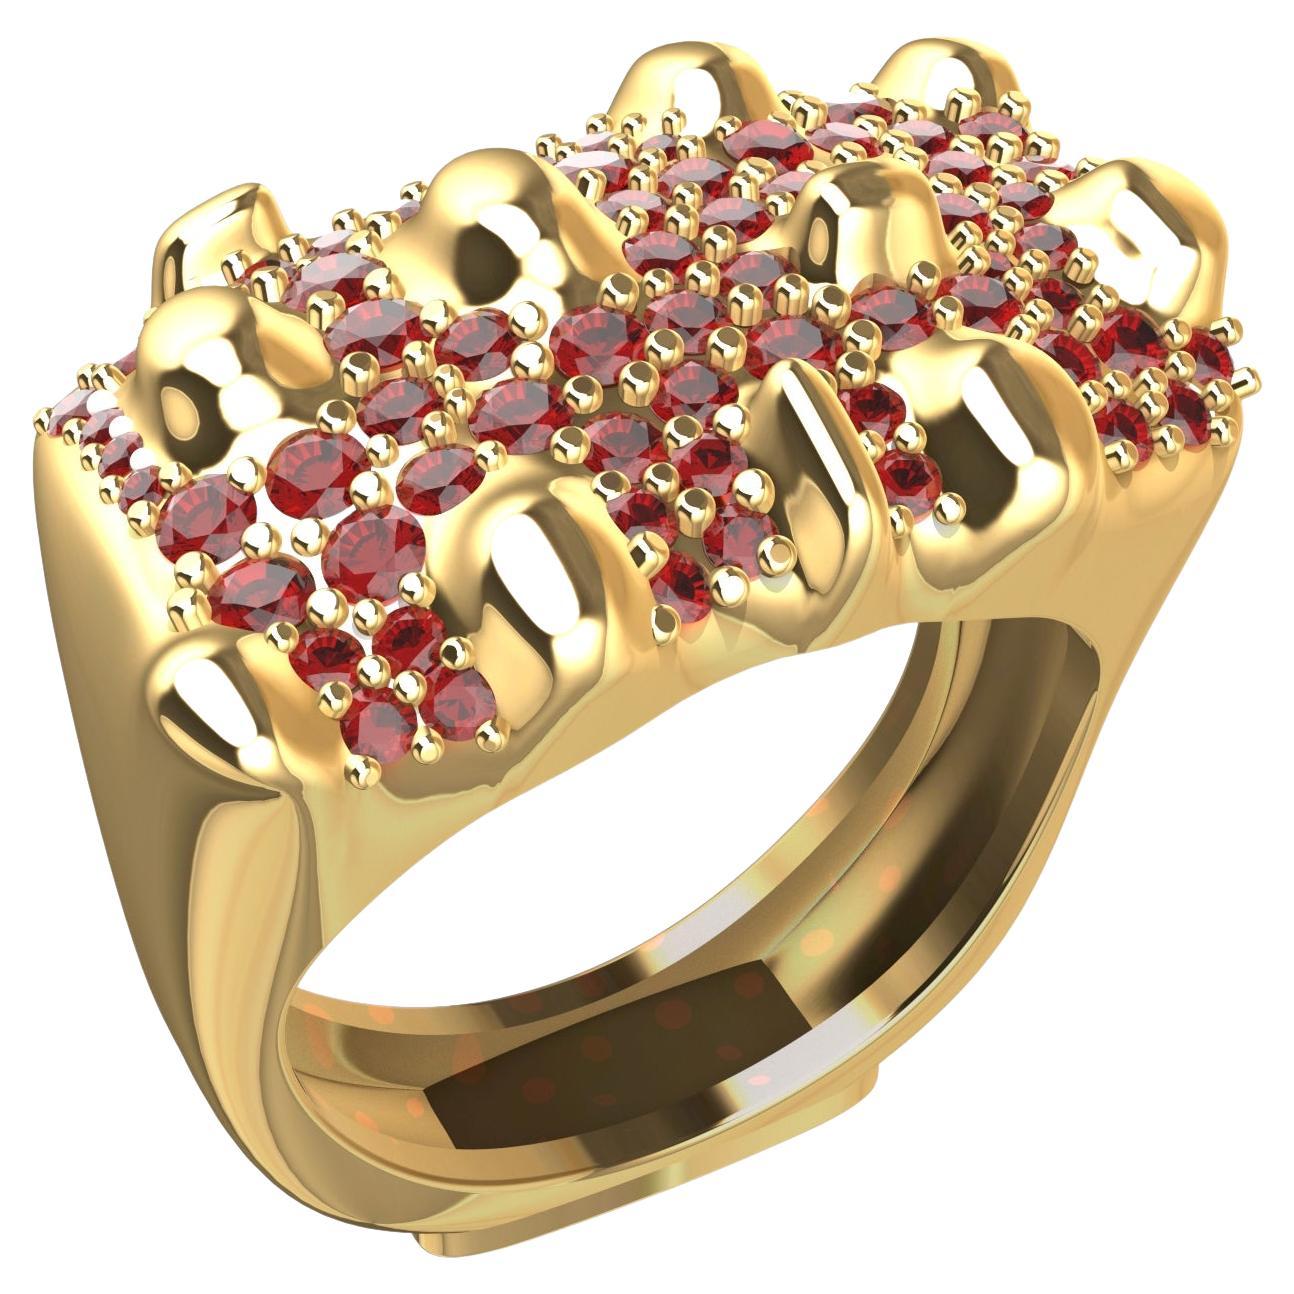 For Sale:  18 Karat Yellow Gold and Rubies Cactus Sculpture Ring